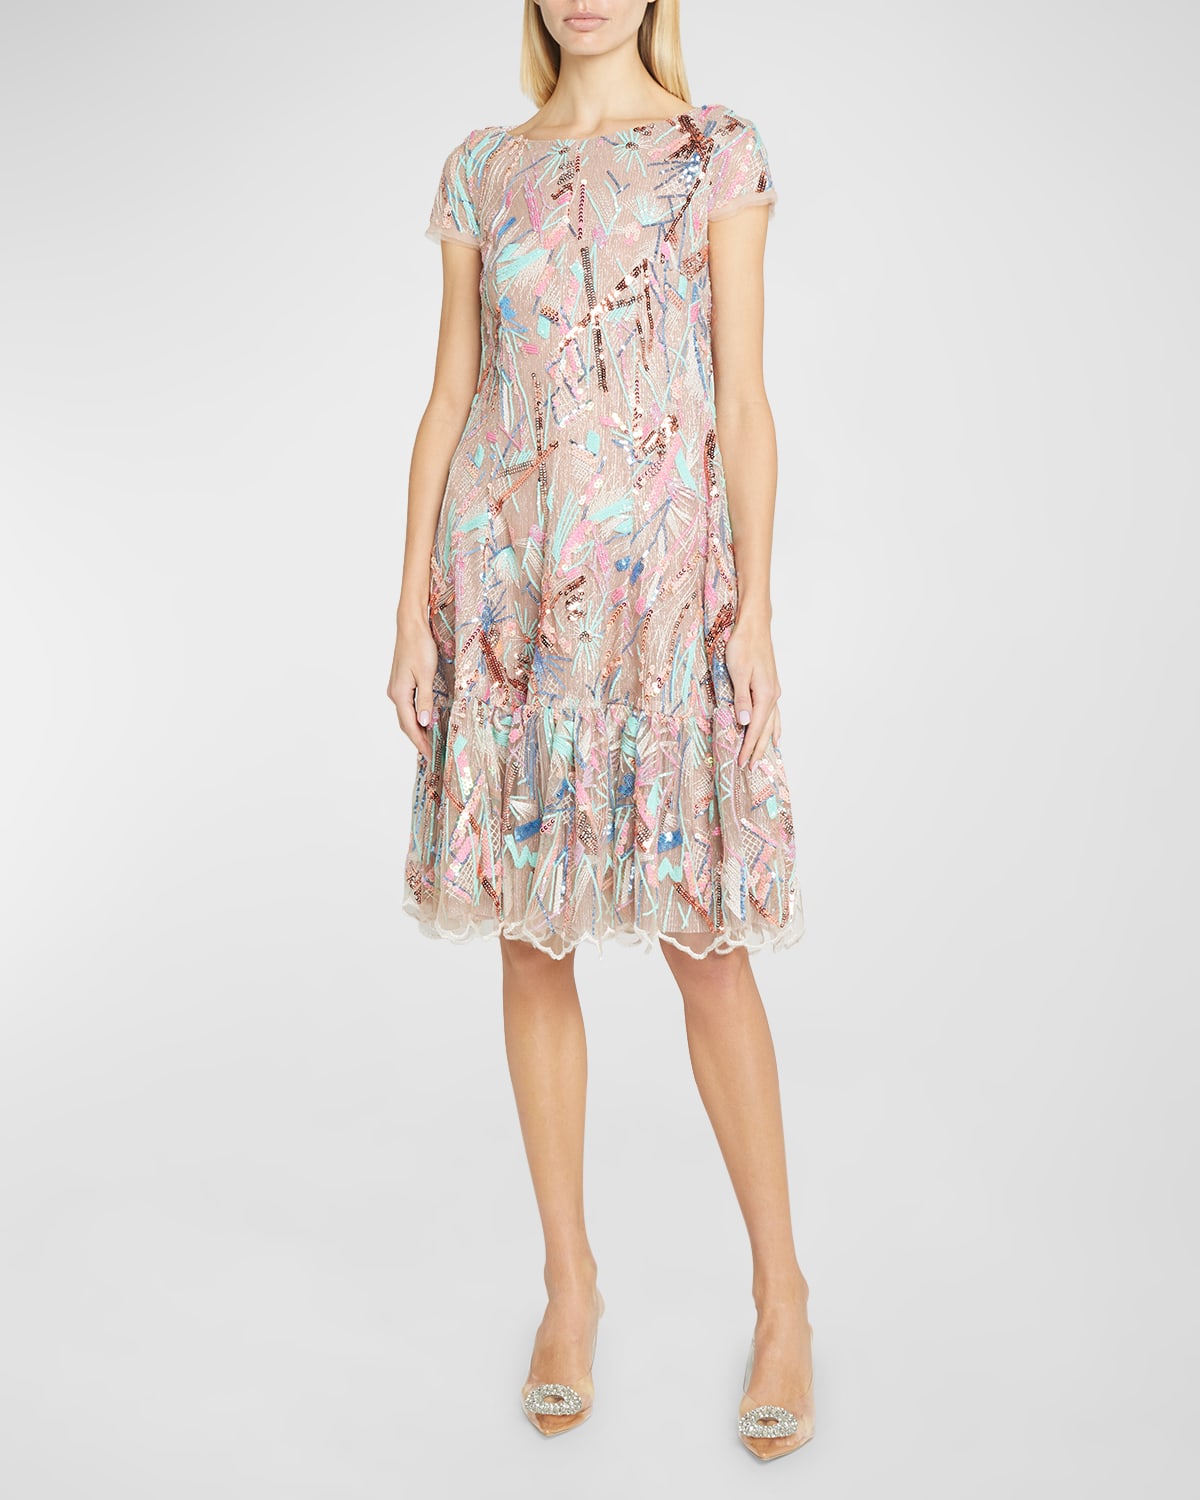 TALBOT RUNHOF SEQUIN EMBROIDERED A-LINE COCKTAIL DRESS